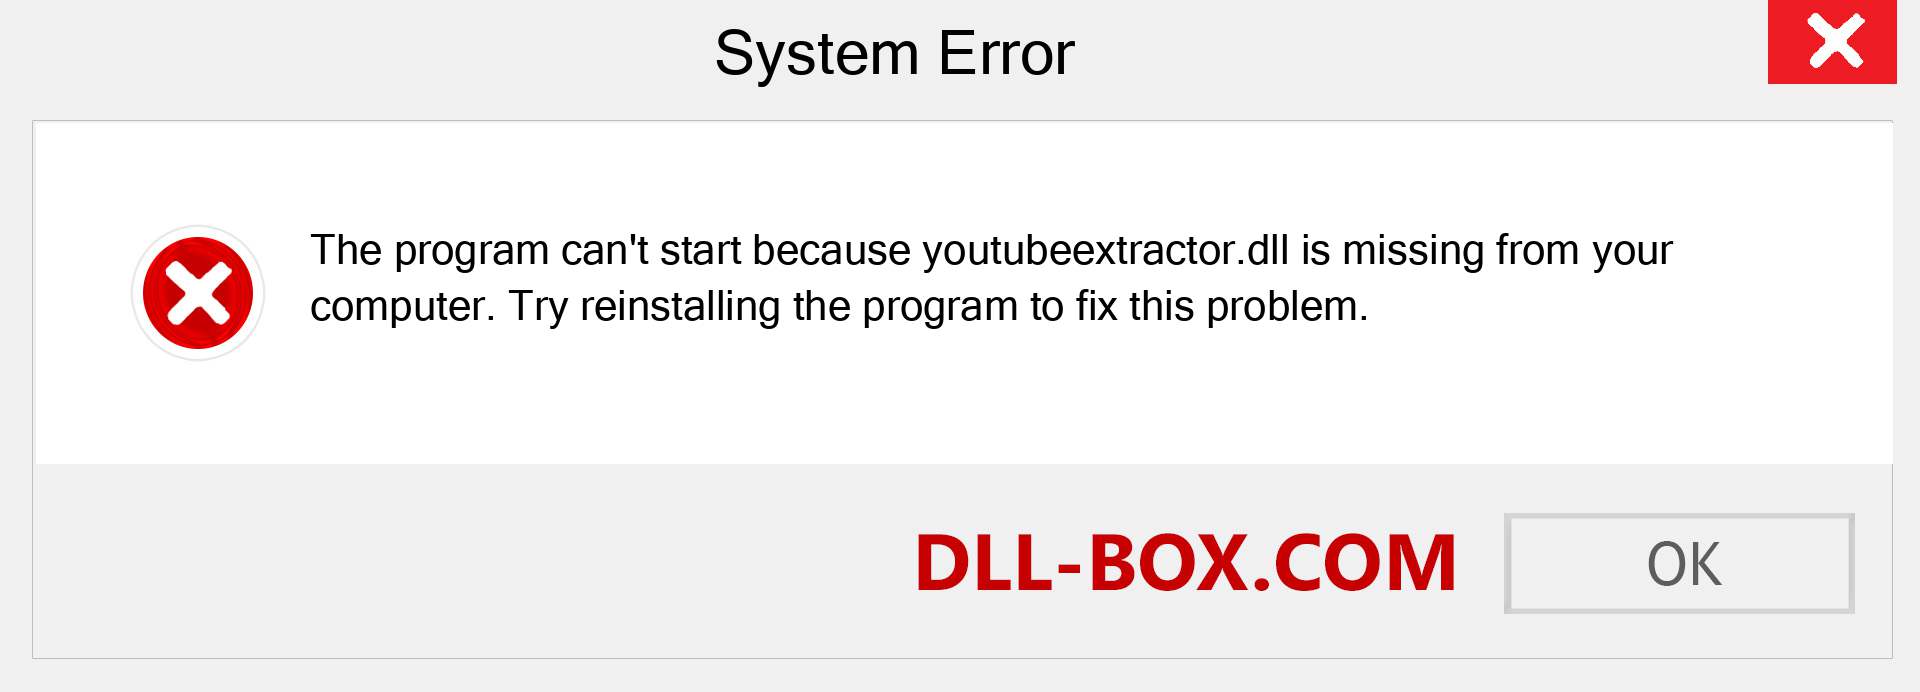  youtubeextractor.dll file is missing?. Download for Windows 7, 8, 10 - Fix  youtubeextractor dll Missing Error on Windows, photos, images